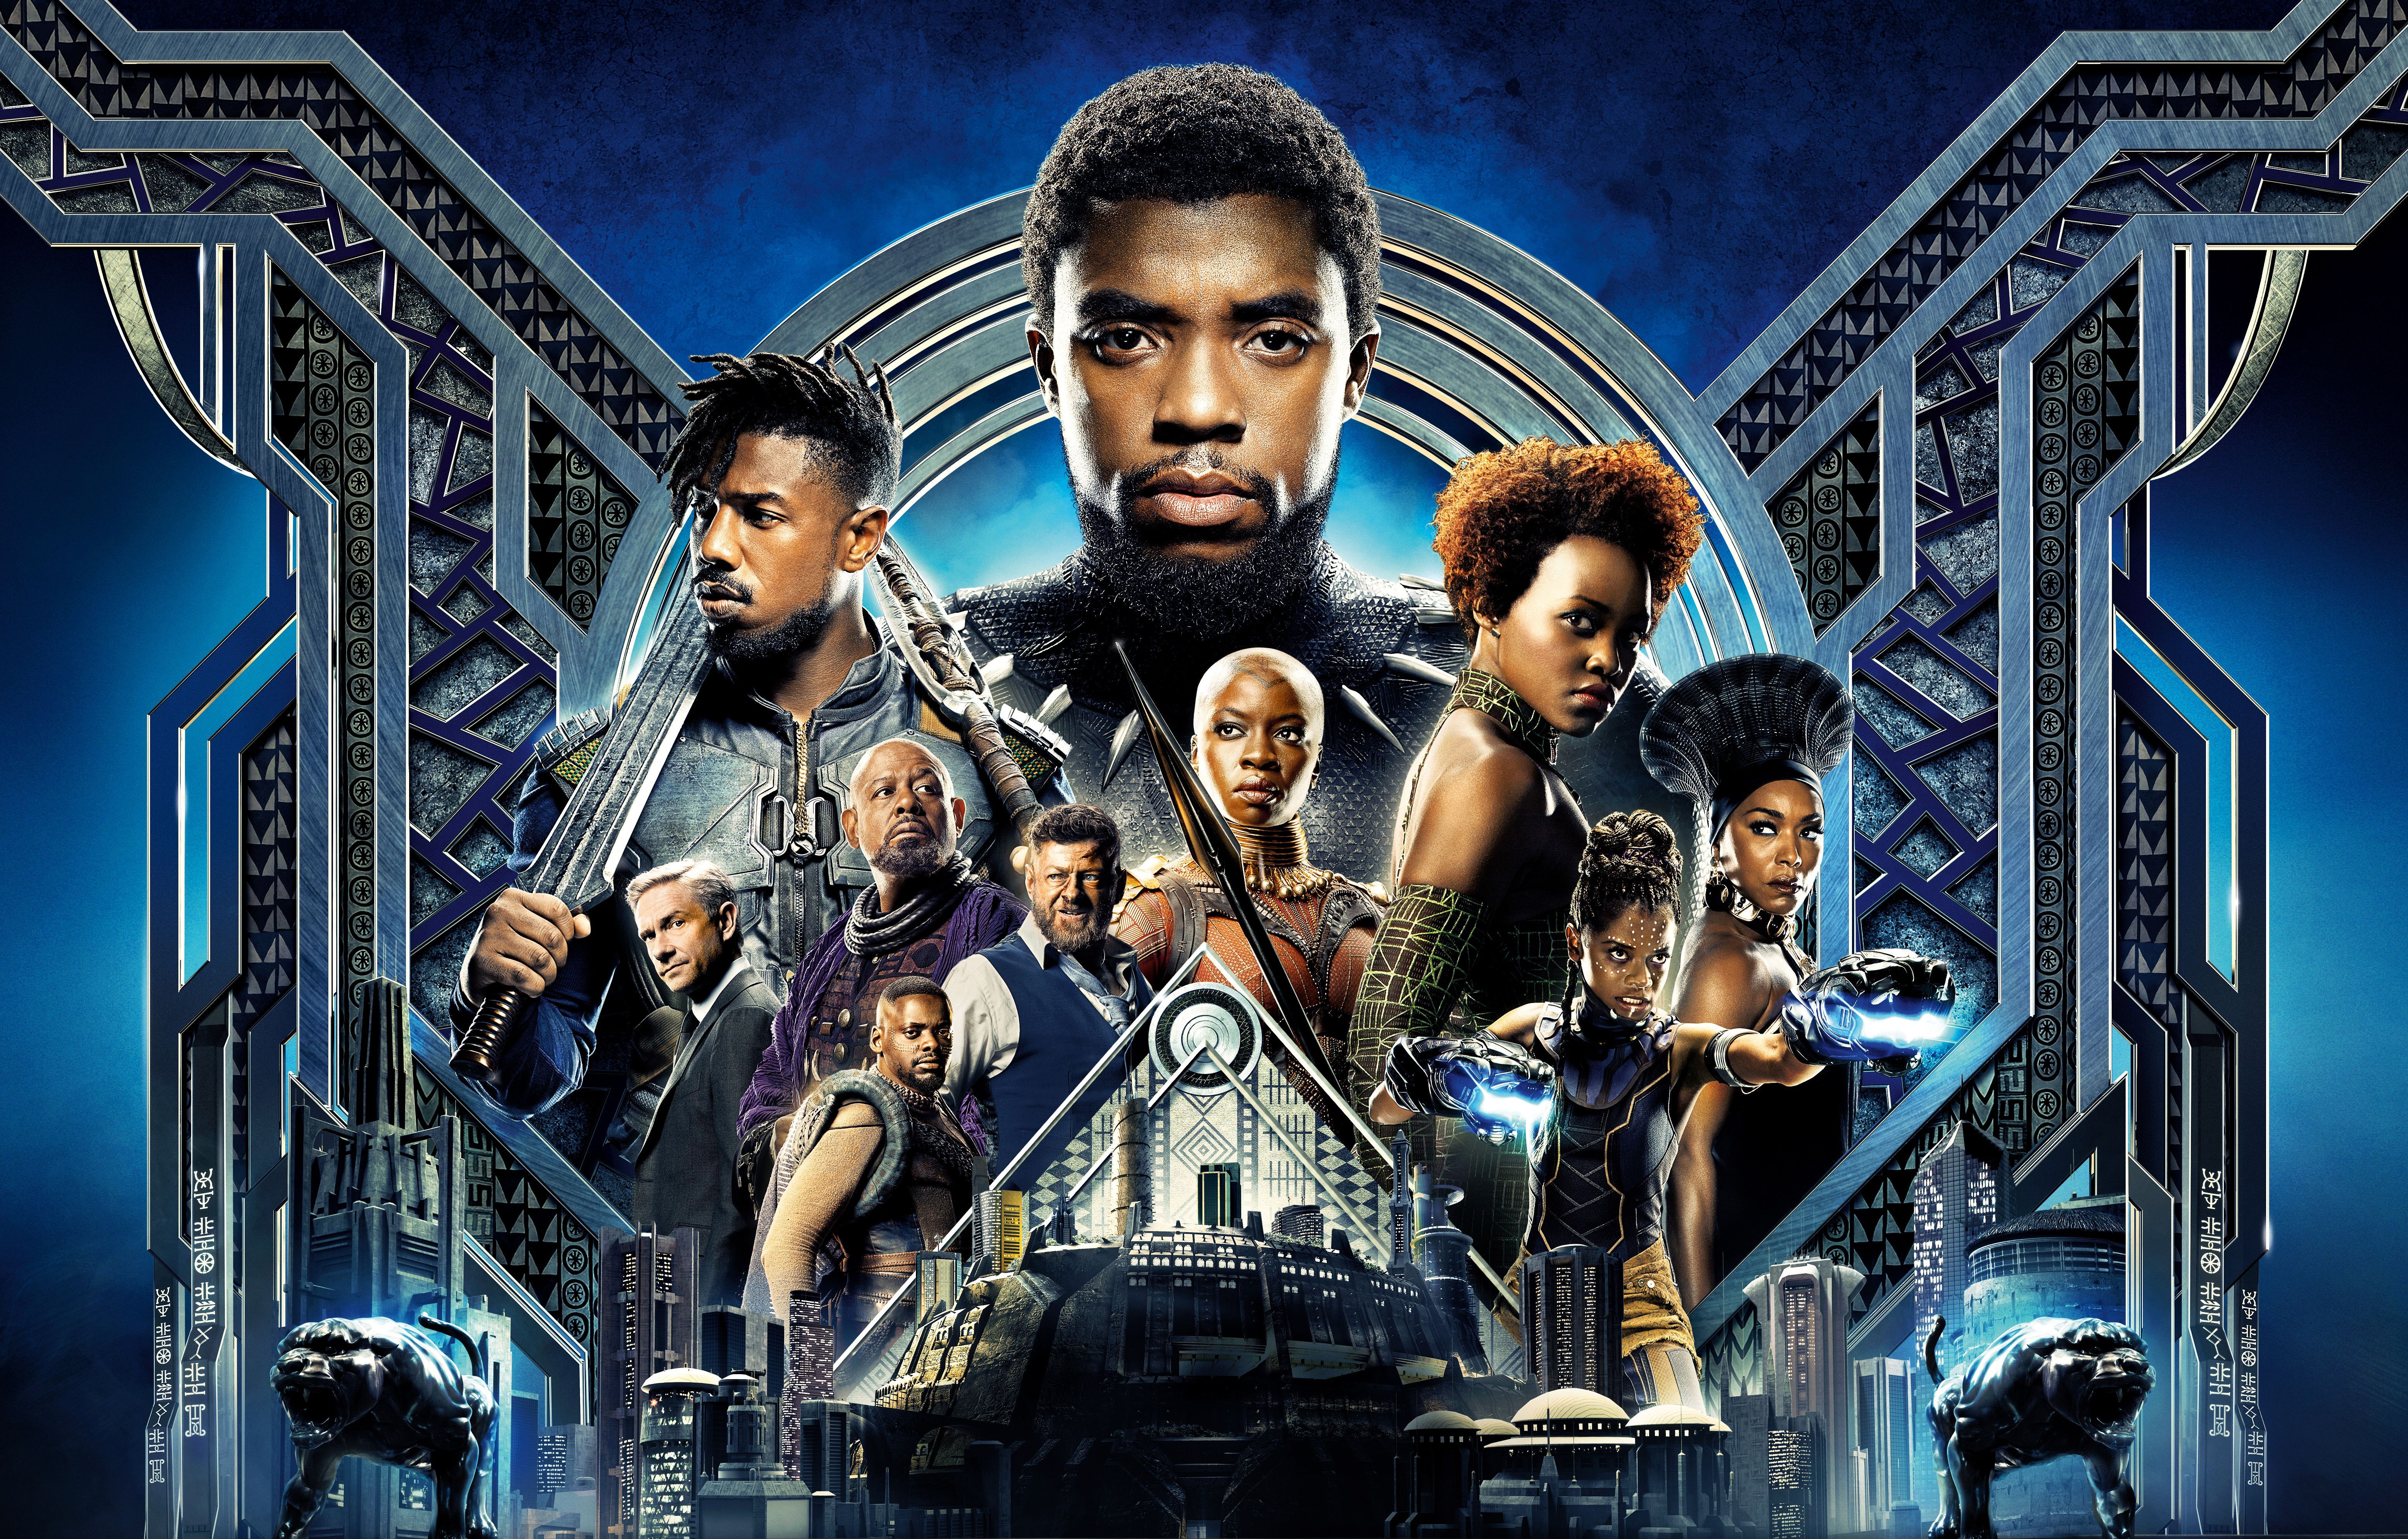 Black Panther 2018 Poster Wallpapers